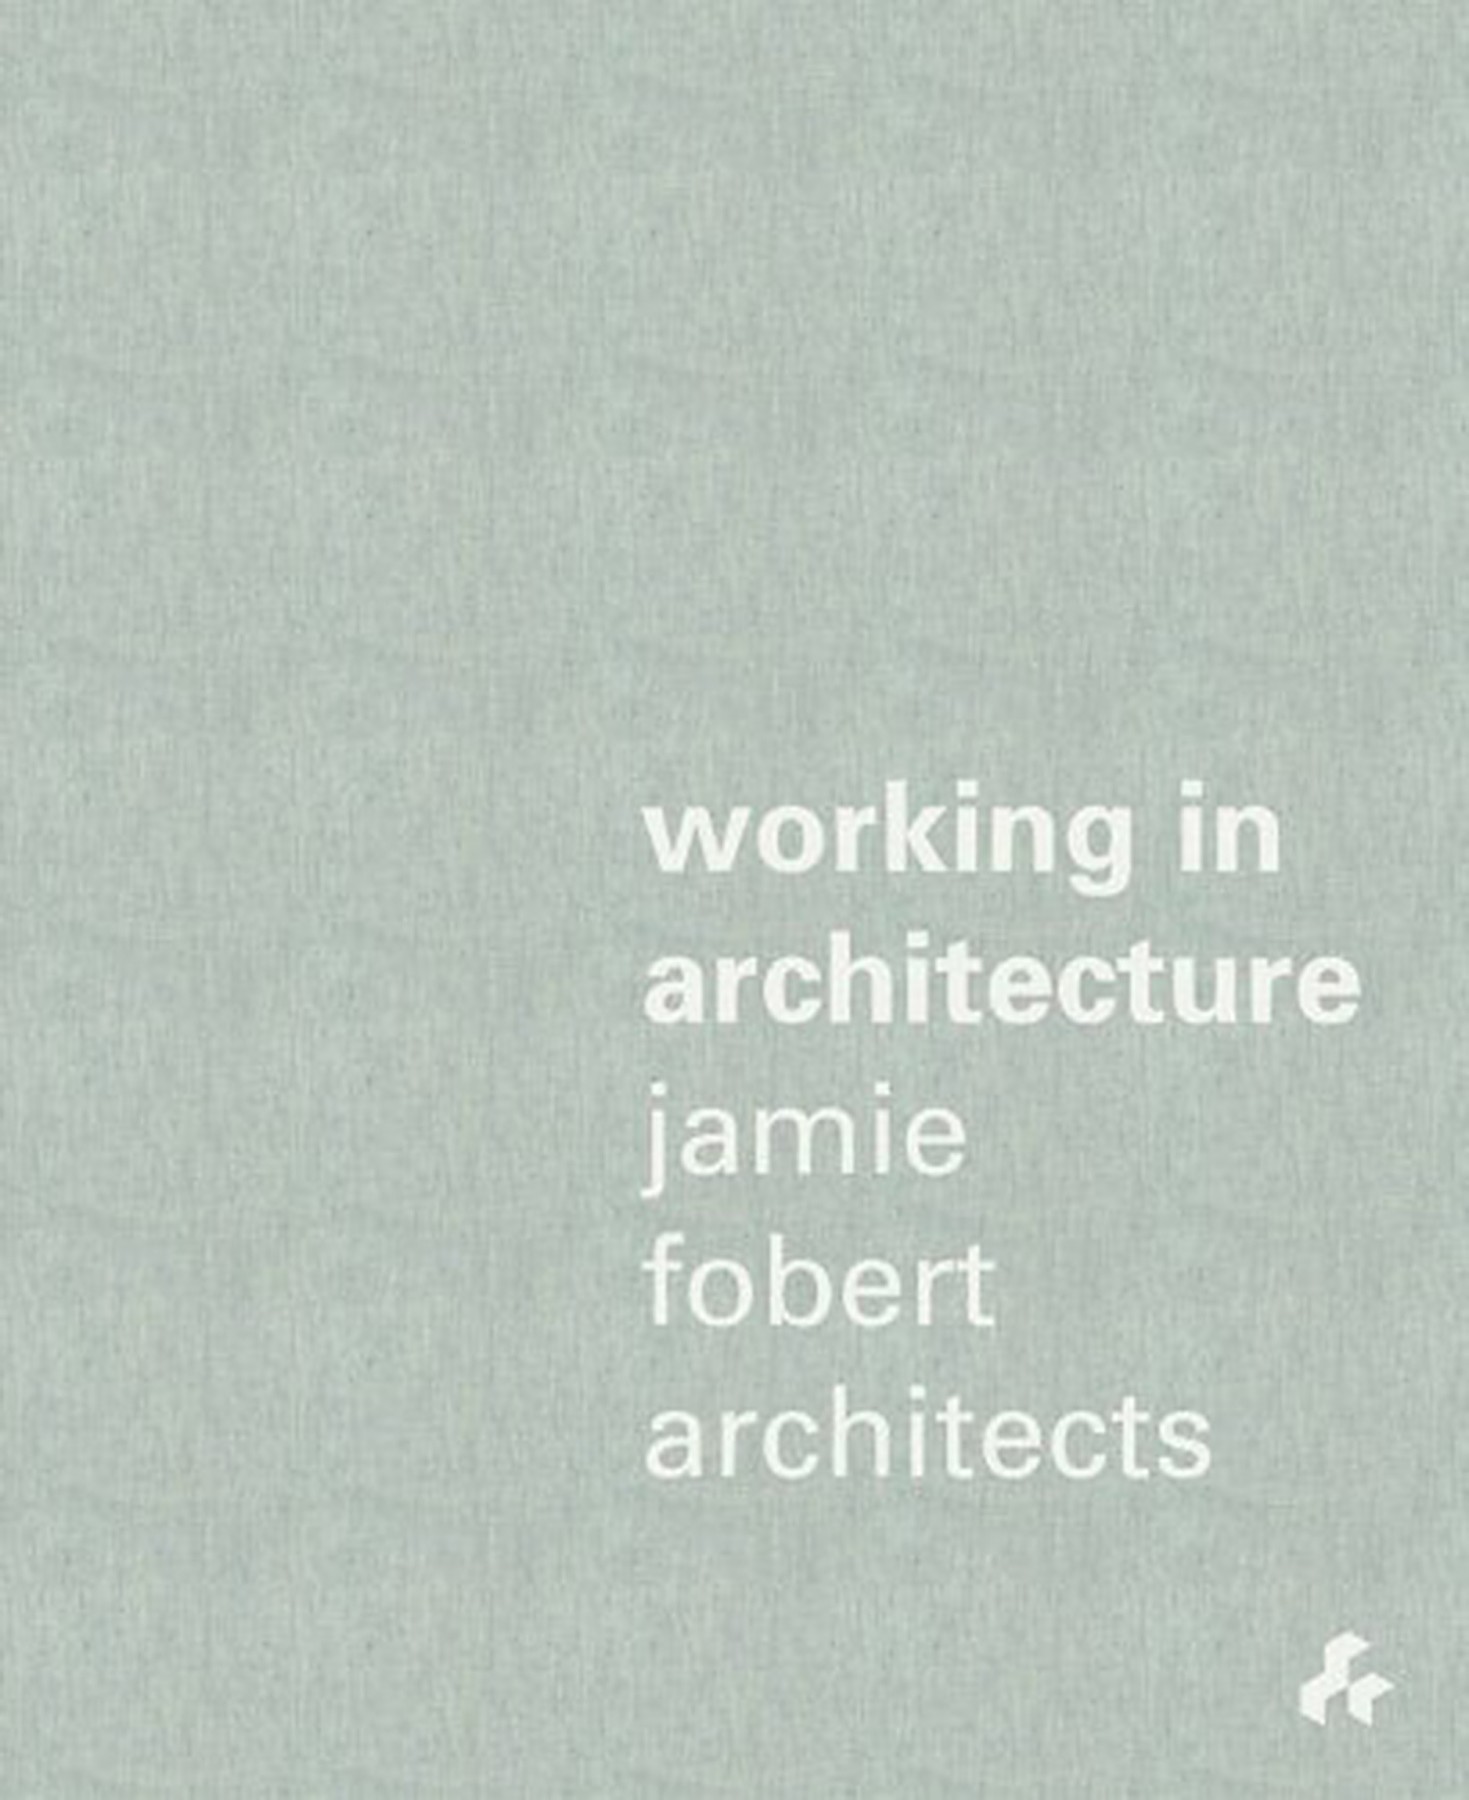 Working-in-Architecture-Jamie-Fobert-Architects-book-cover-demo